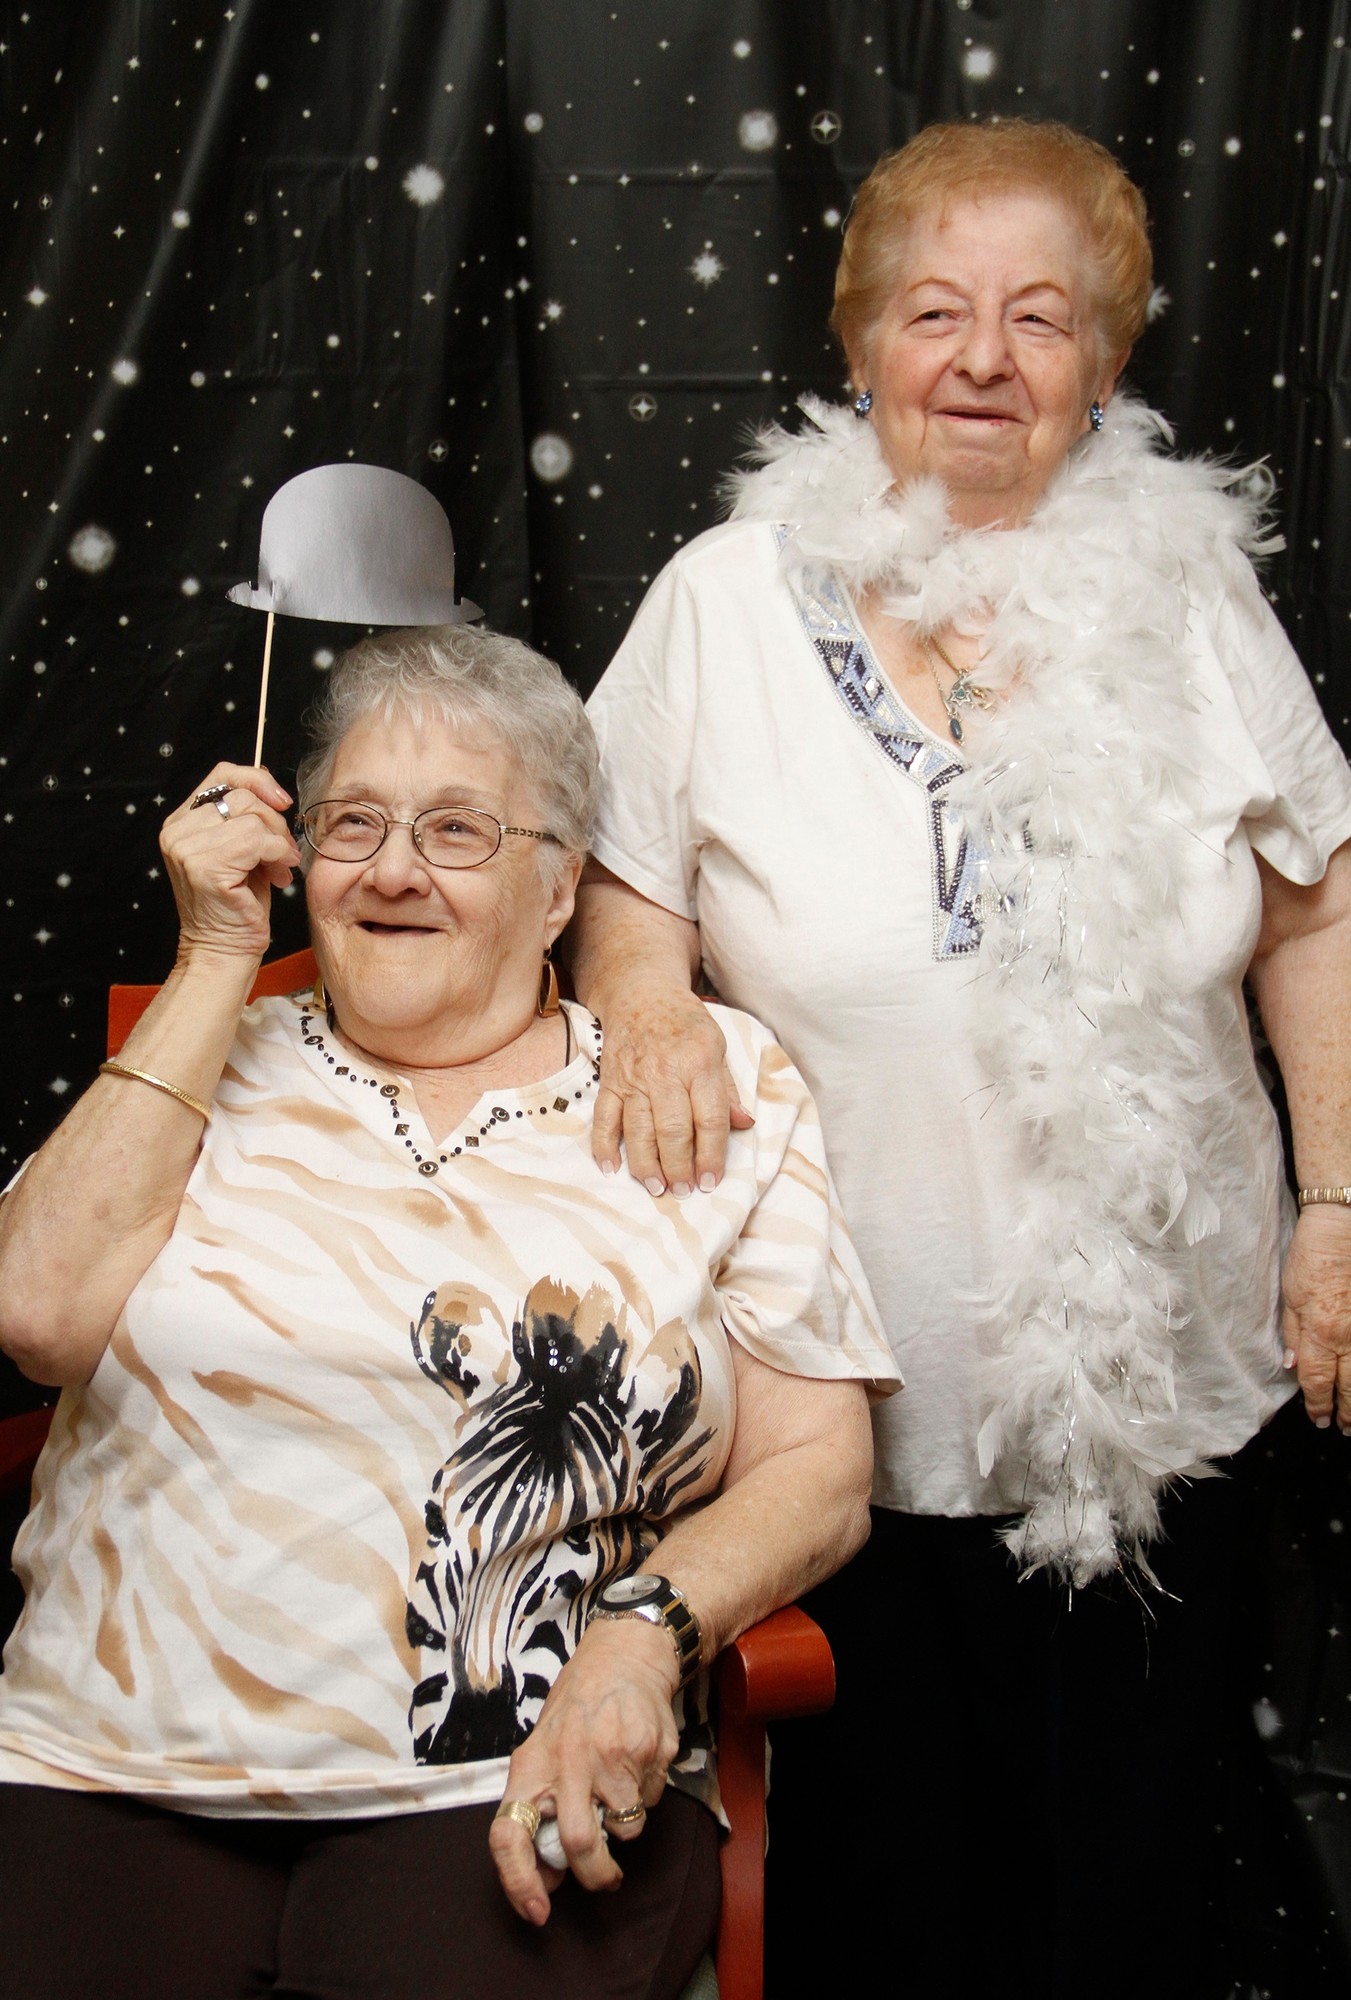 Blanche Epstein and Bernice Lefkowitz took advantage of the photo station and props.